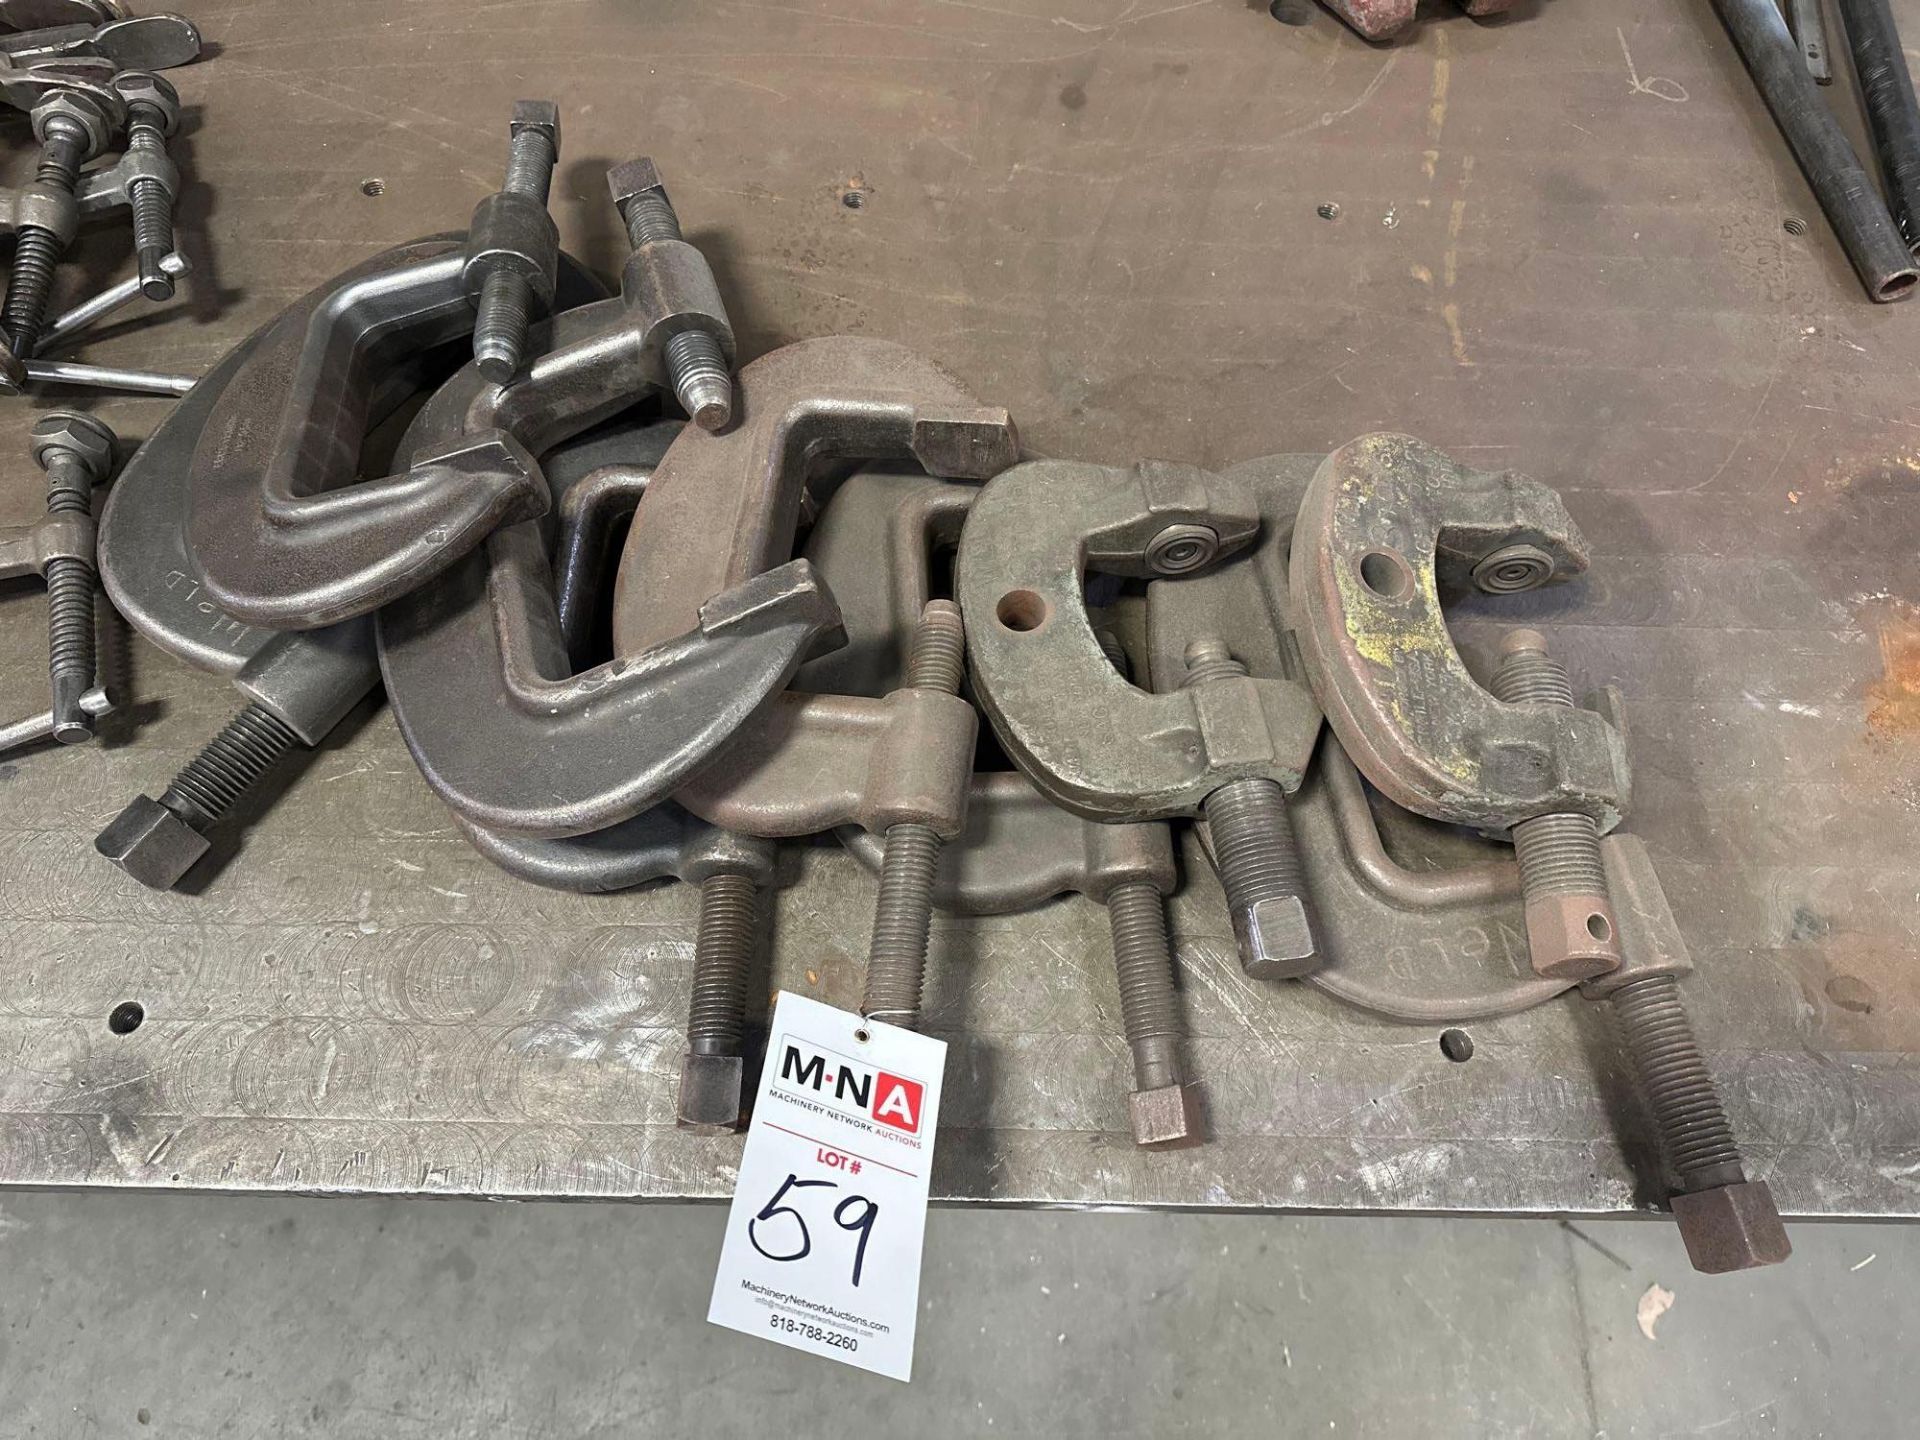 Assorted C-Clamps